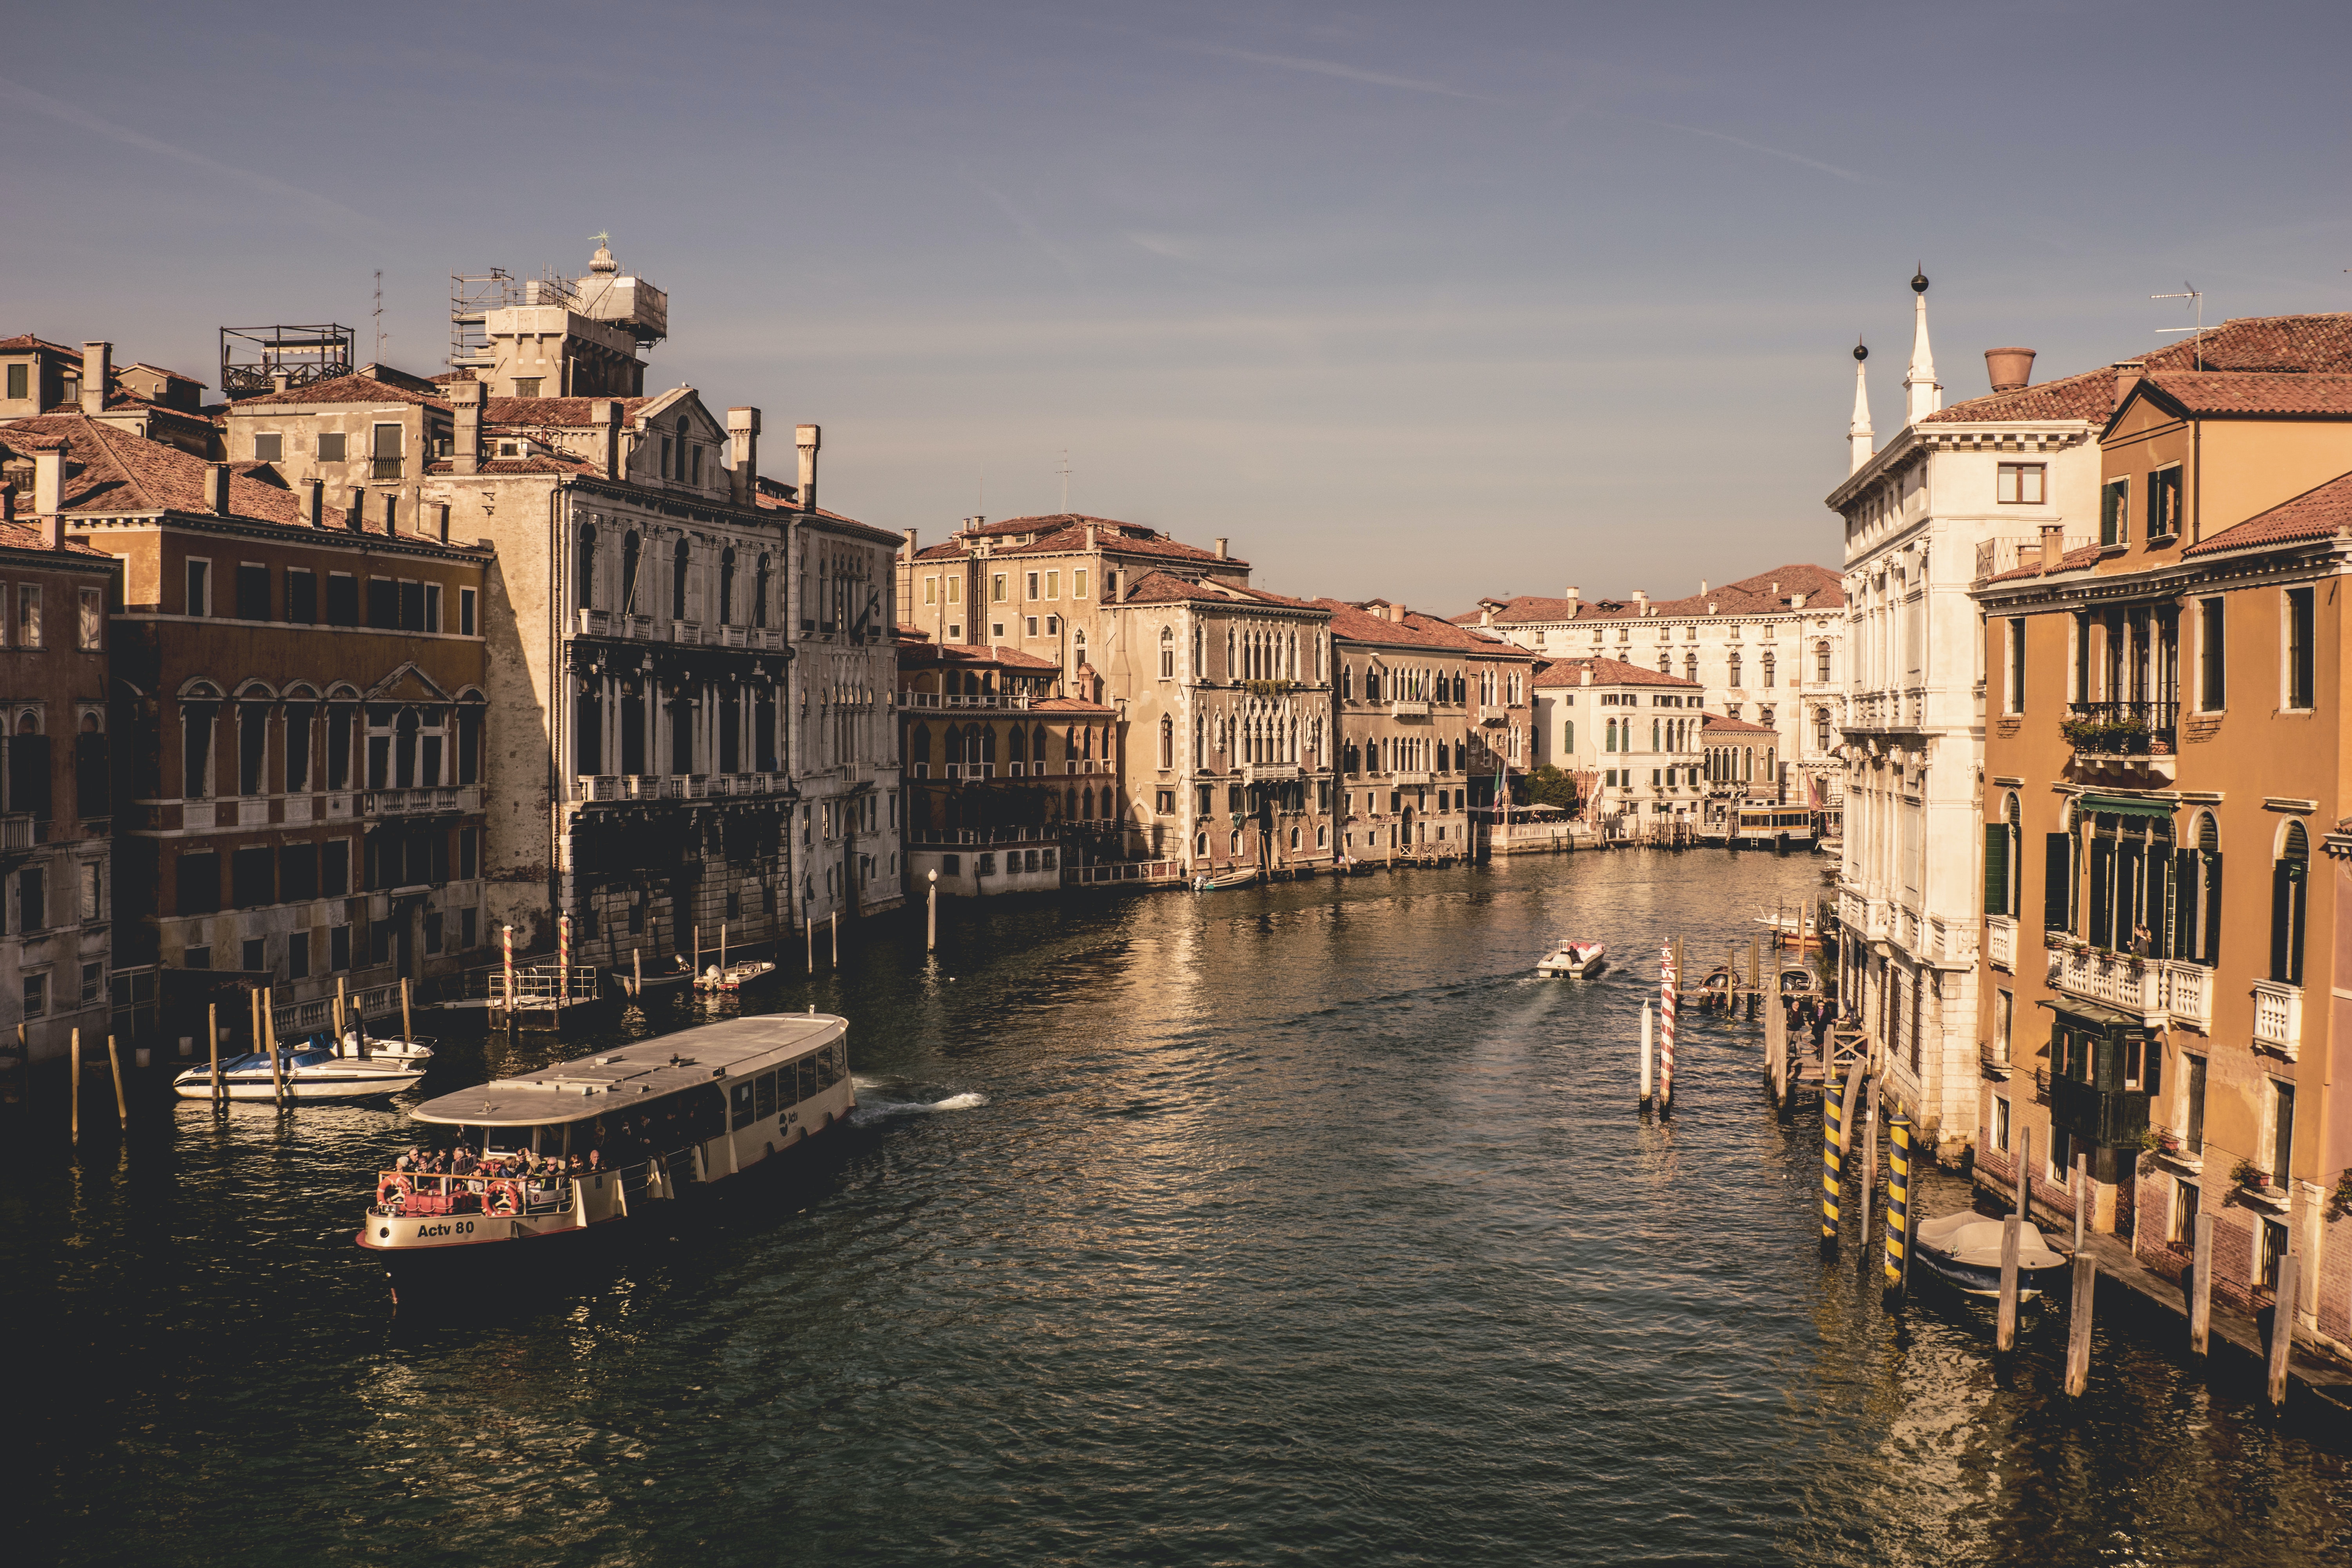 Venice, film set for a new TV series